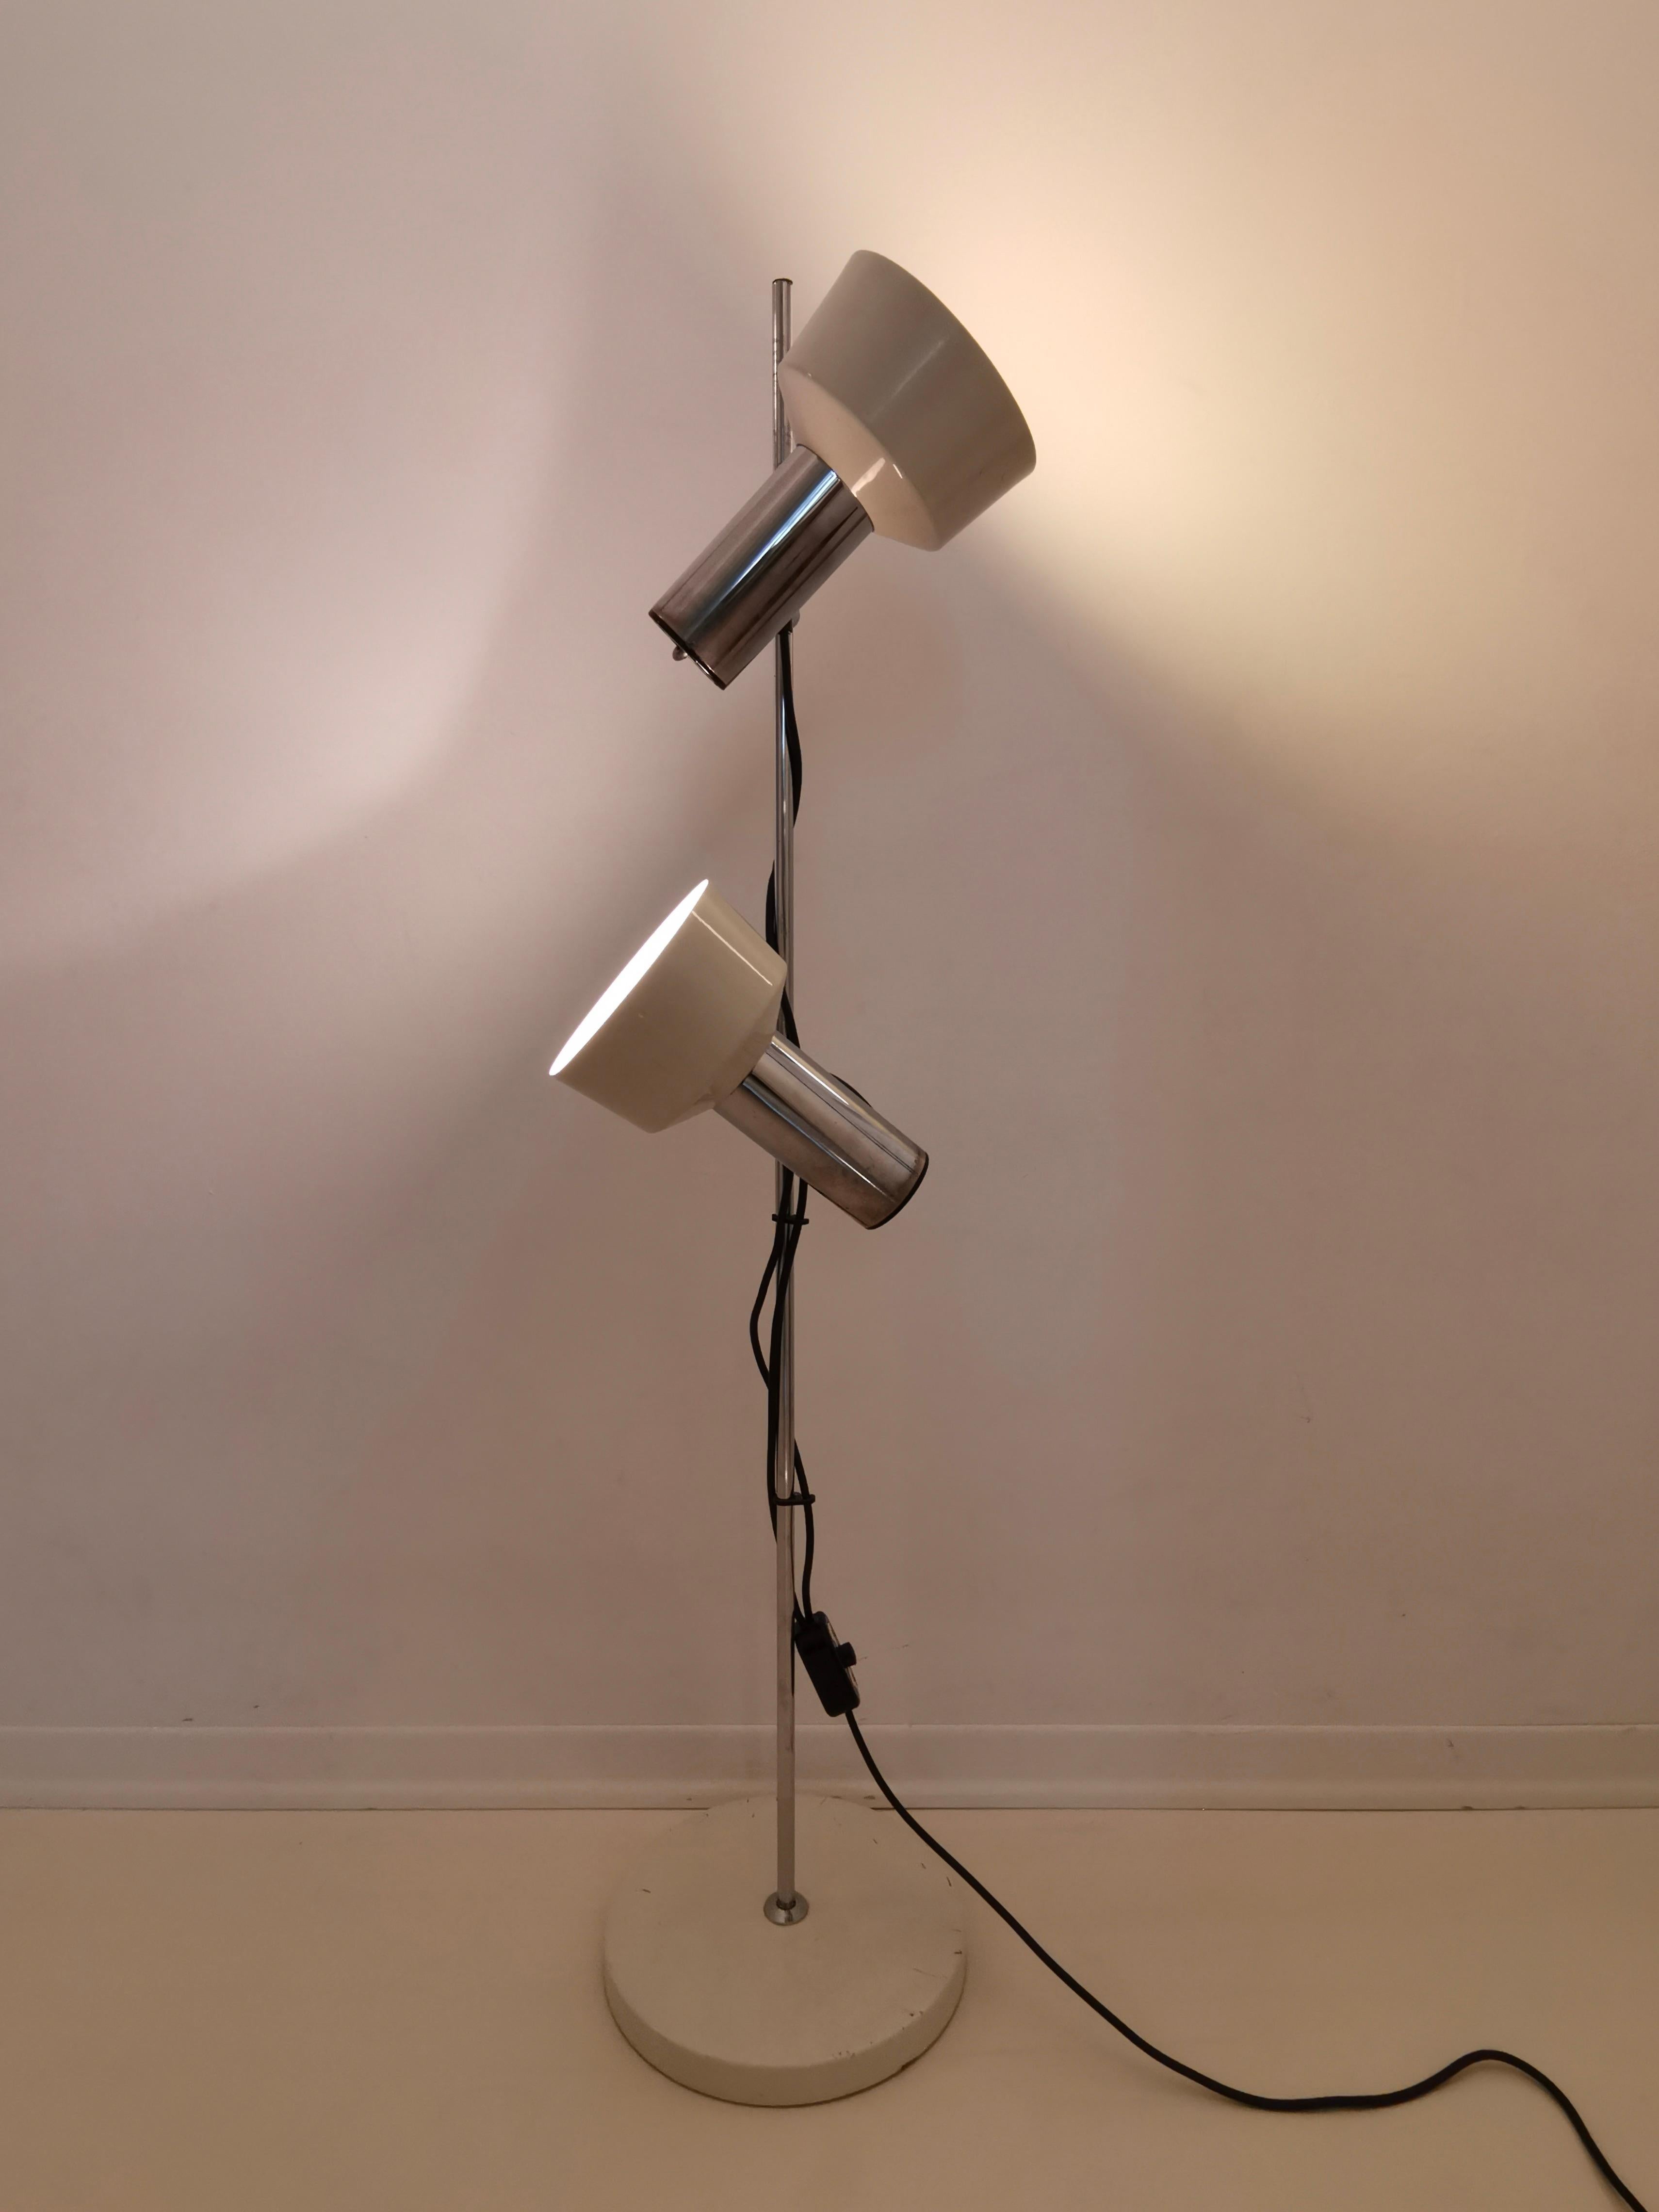 Vintage floor lamp

Period: 1960s

Style: Mid-Century Modern, classic, industrial

Bulbs: E27

Colur: white

Materials: Metal, aluminium, plastic parts

Condition: original vintage condition, signs of age and use, some schratces on the